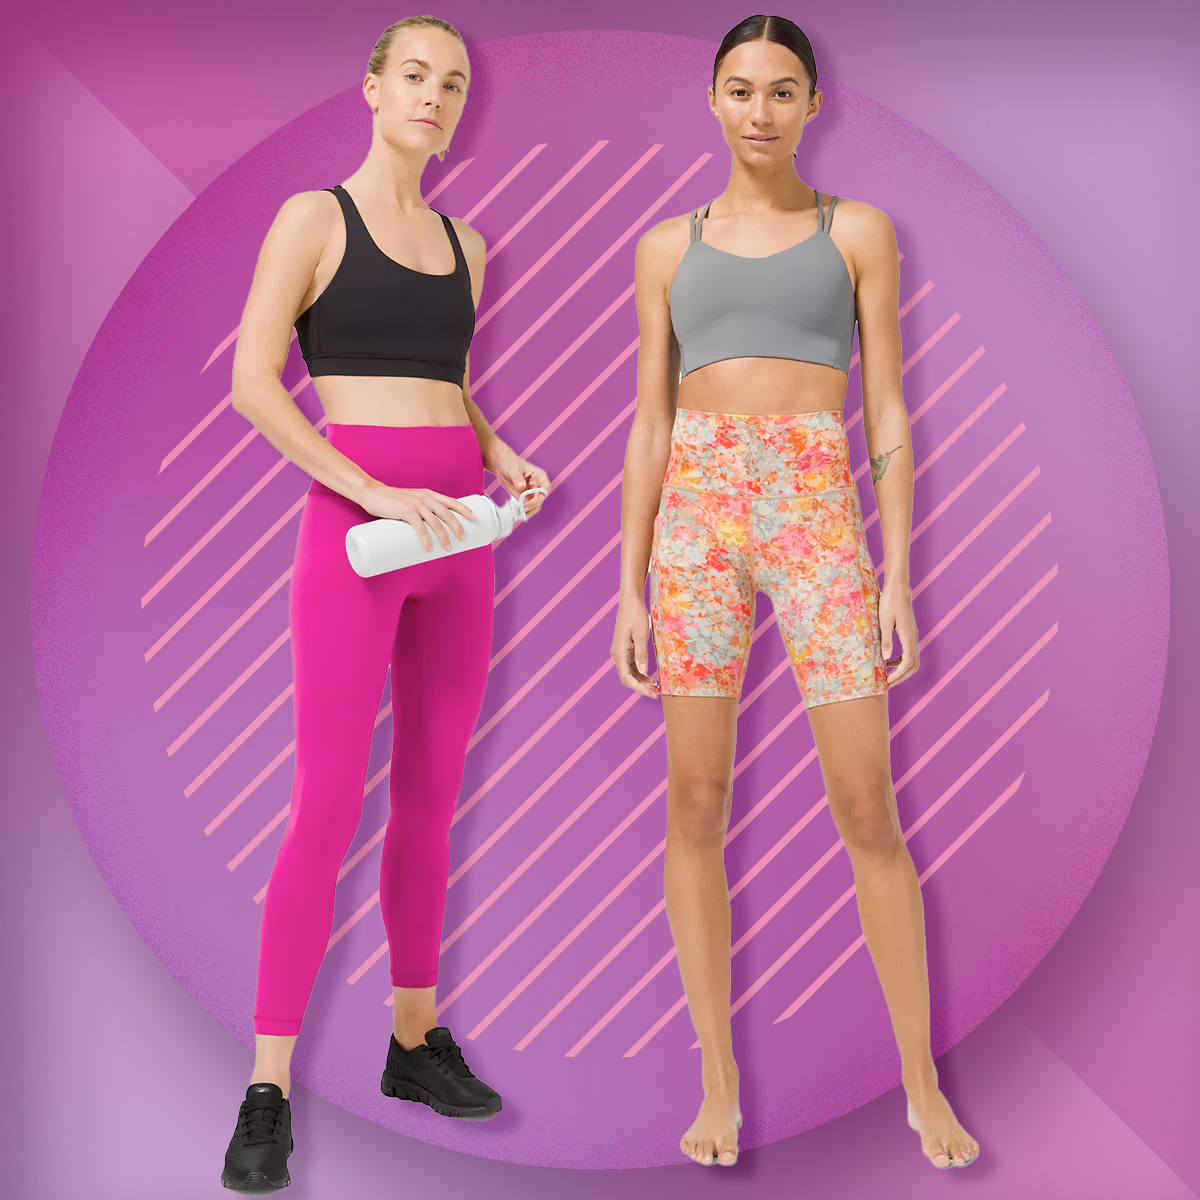 https://akns-images.eonline.com/eol_images/Entire_Site/202135/rs_1200x1200-210405160326-1200-lululemon-mothers-day-sale10.jpg?fit=around%7C1080:1080&output-quality=90&crop=1080:1080;center,top